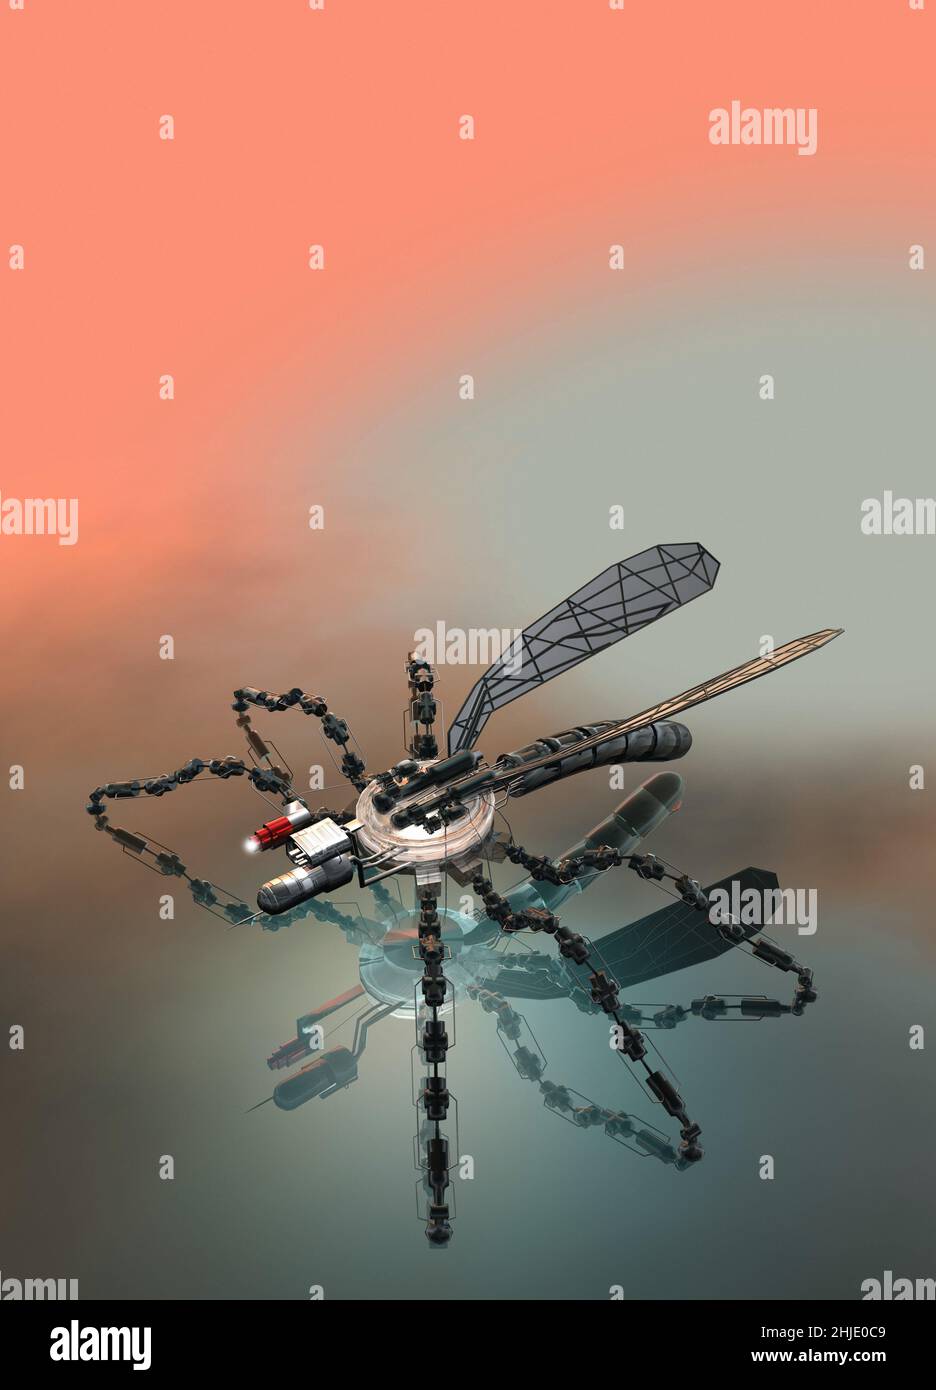 Insect spy drone, conceptual illustration Stock Photo